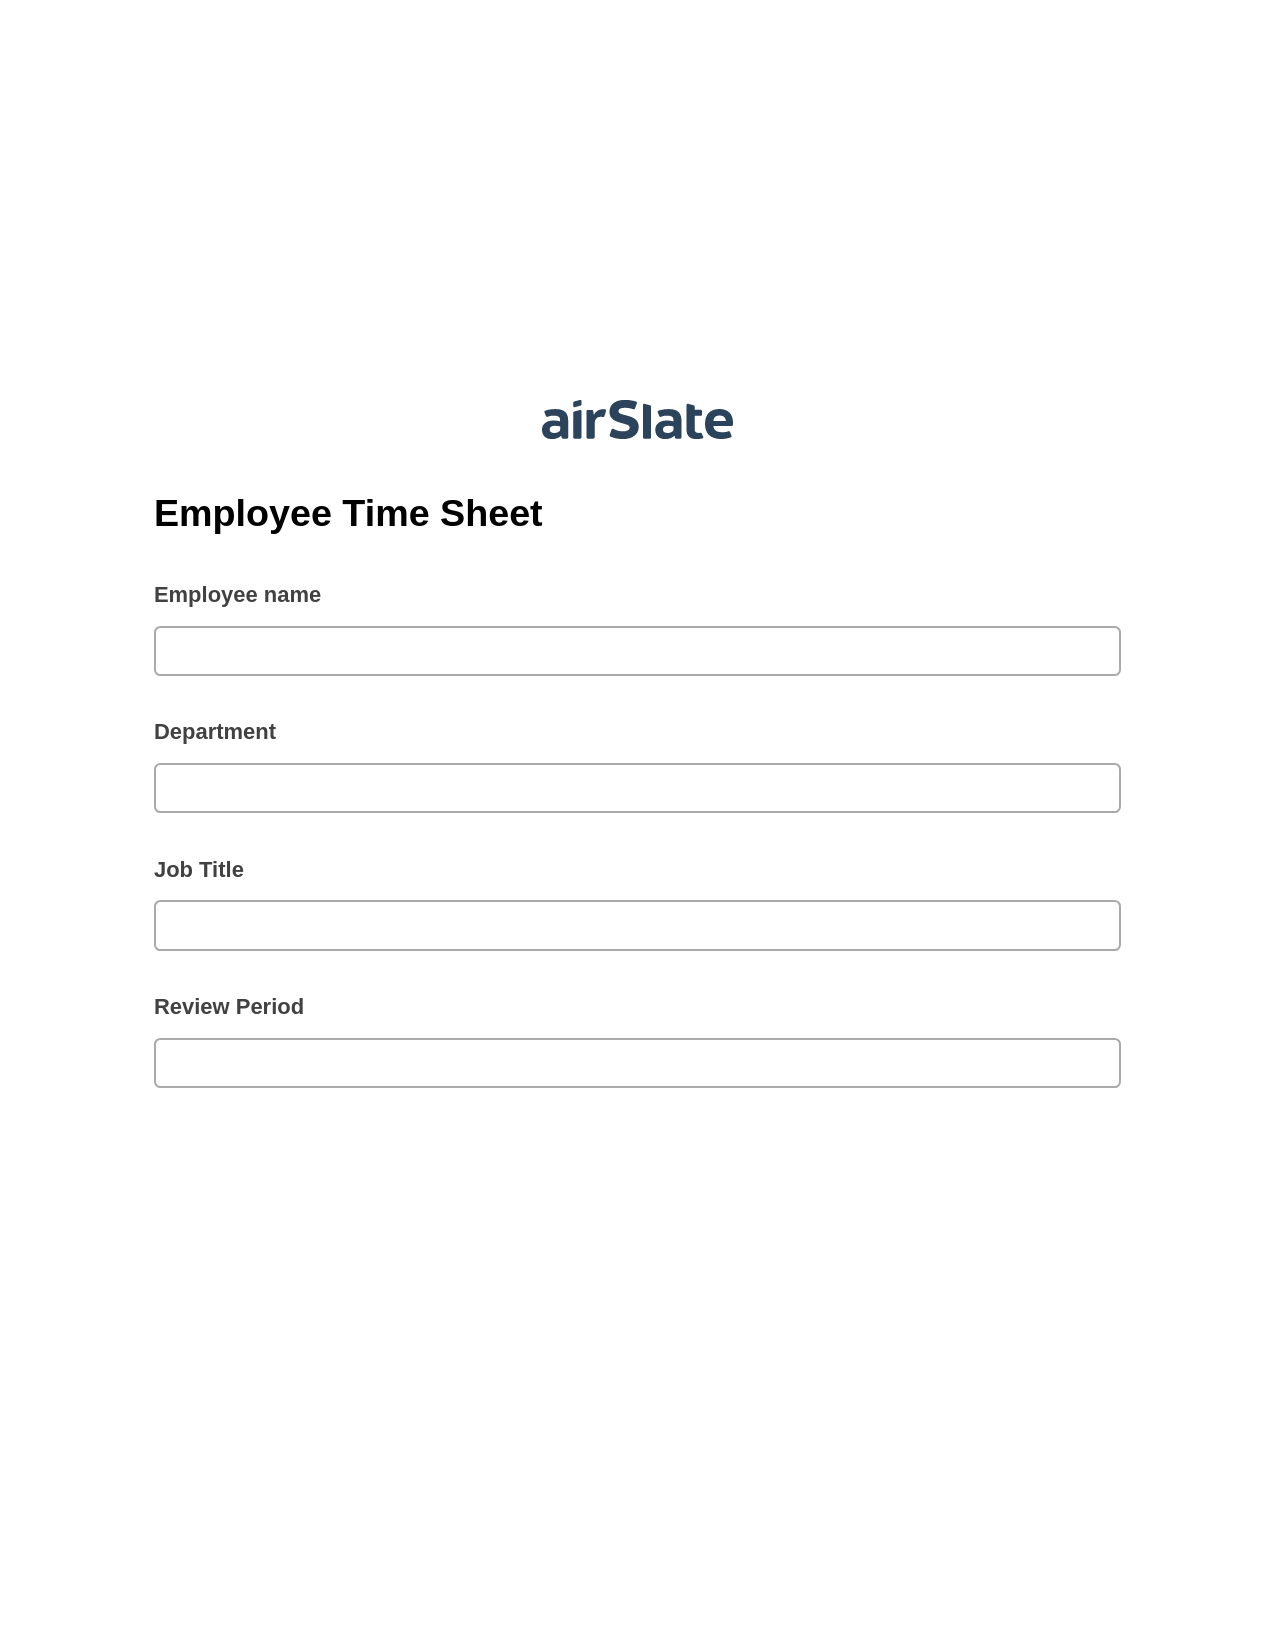 Employee Time Sheet Pre-fill from another Slate Bot, Create Salesforce Records Bot, Archive to Google Drive Bot